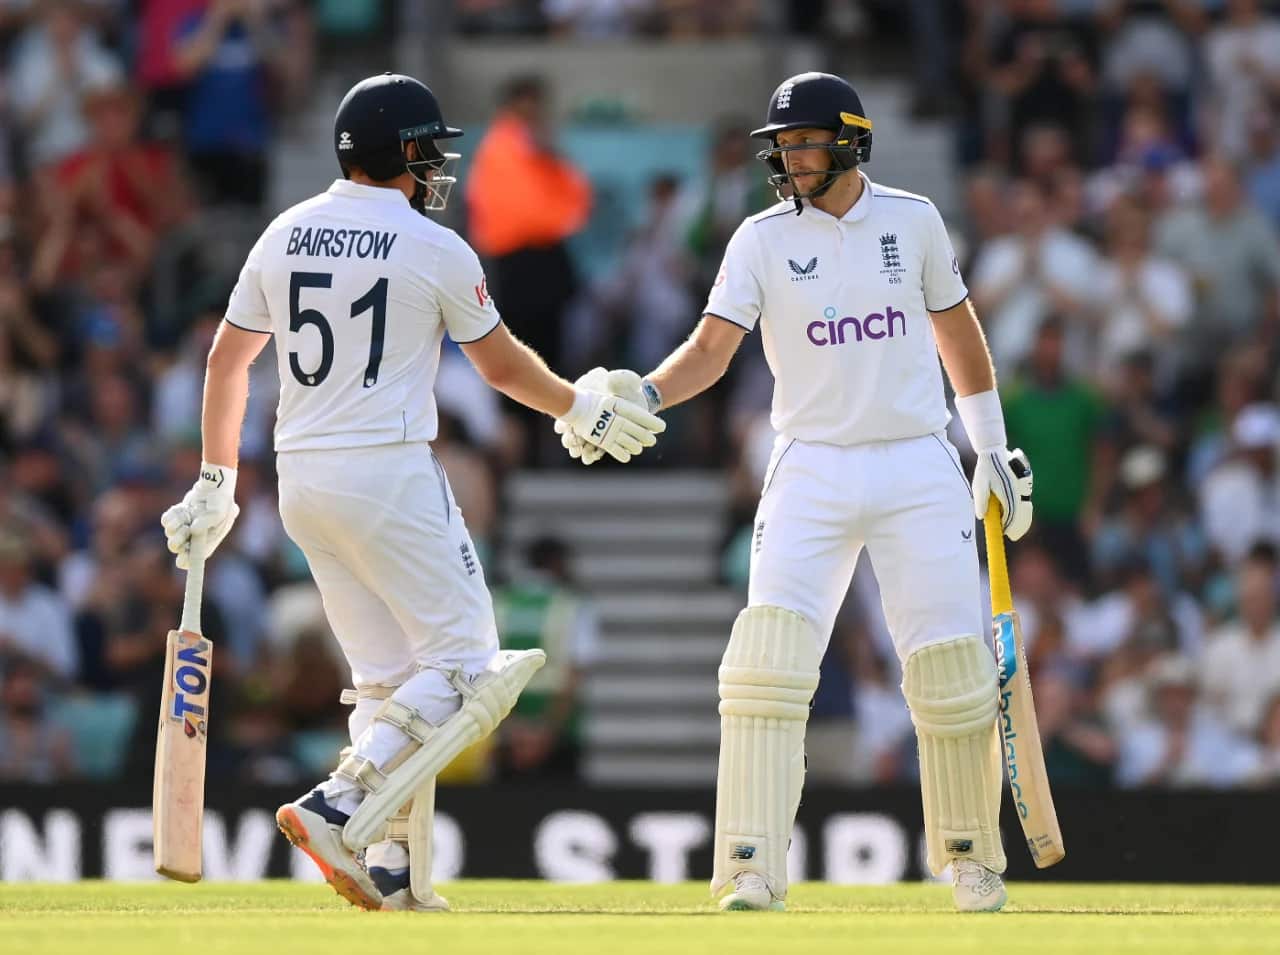 Ashes | Joe Root, Bairstow, Crawley Bomb Australia On Day 3 To Secure Massive Lead